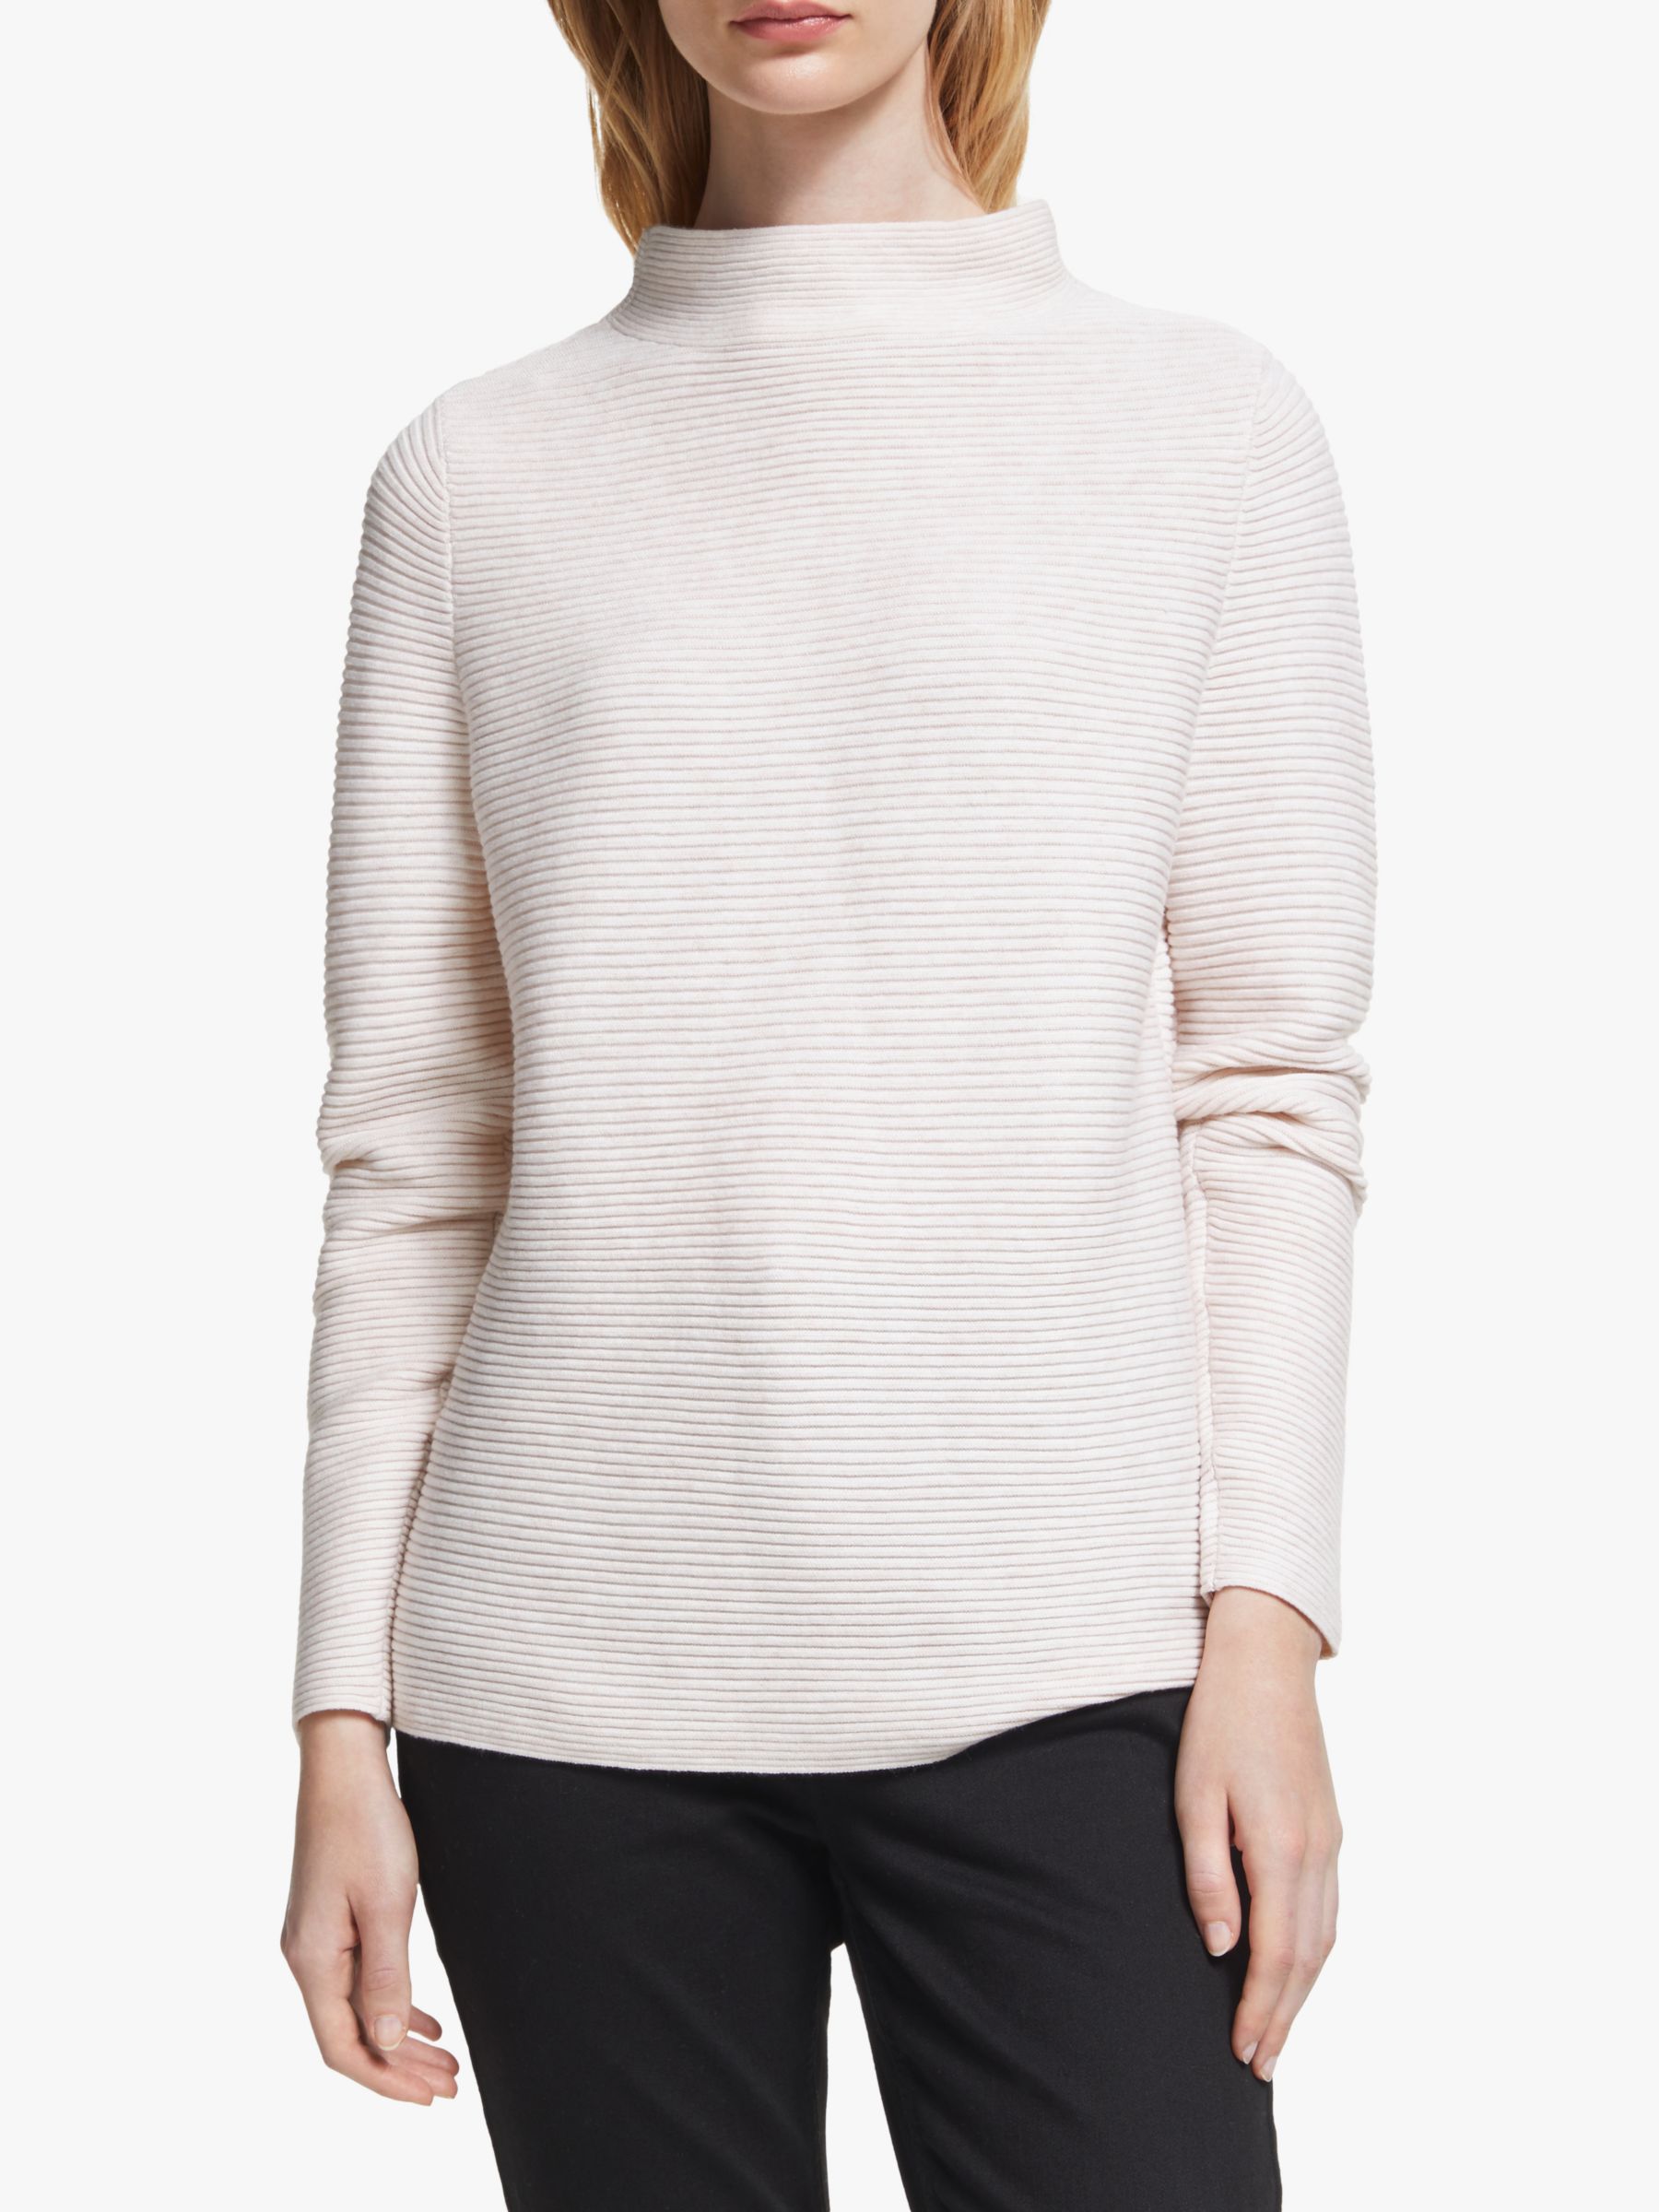 John Lewis & Partners Purl Bar High Neck Sweater, Champagne